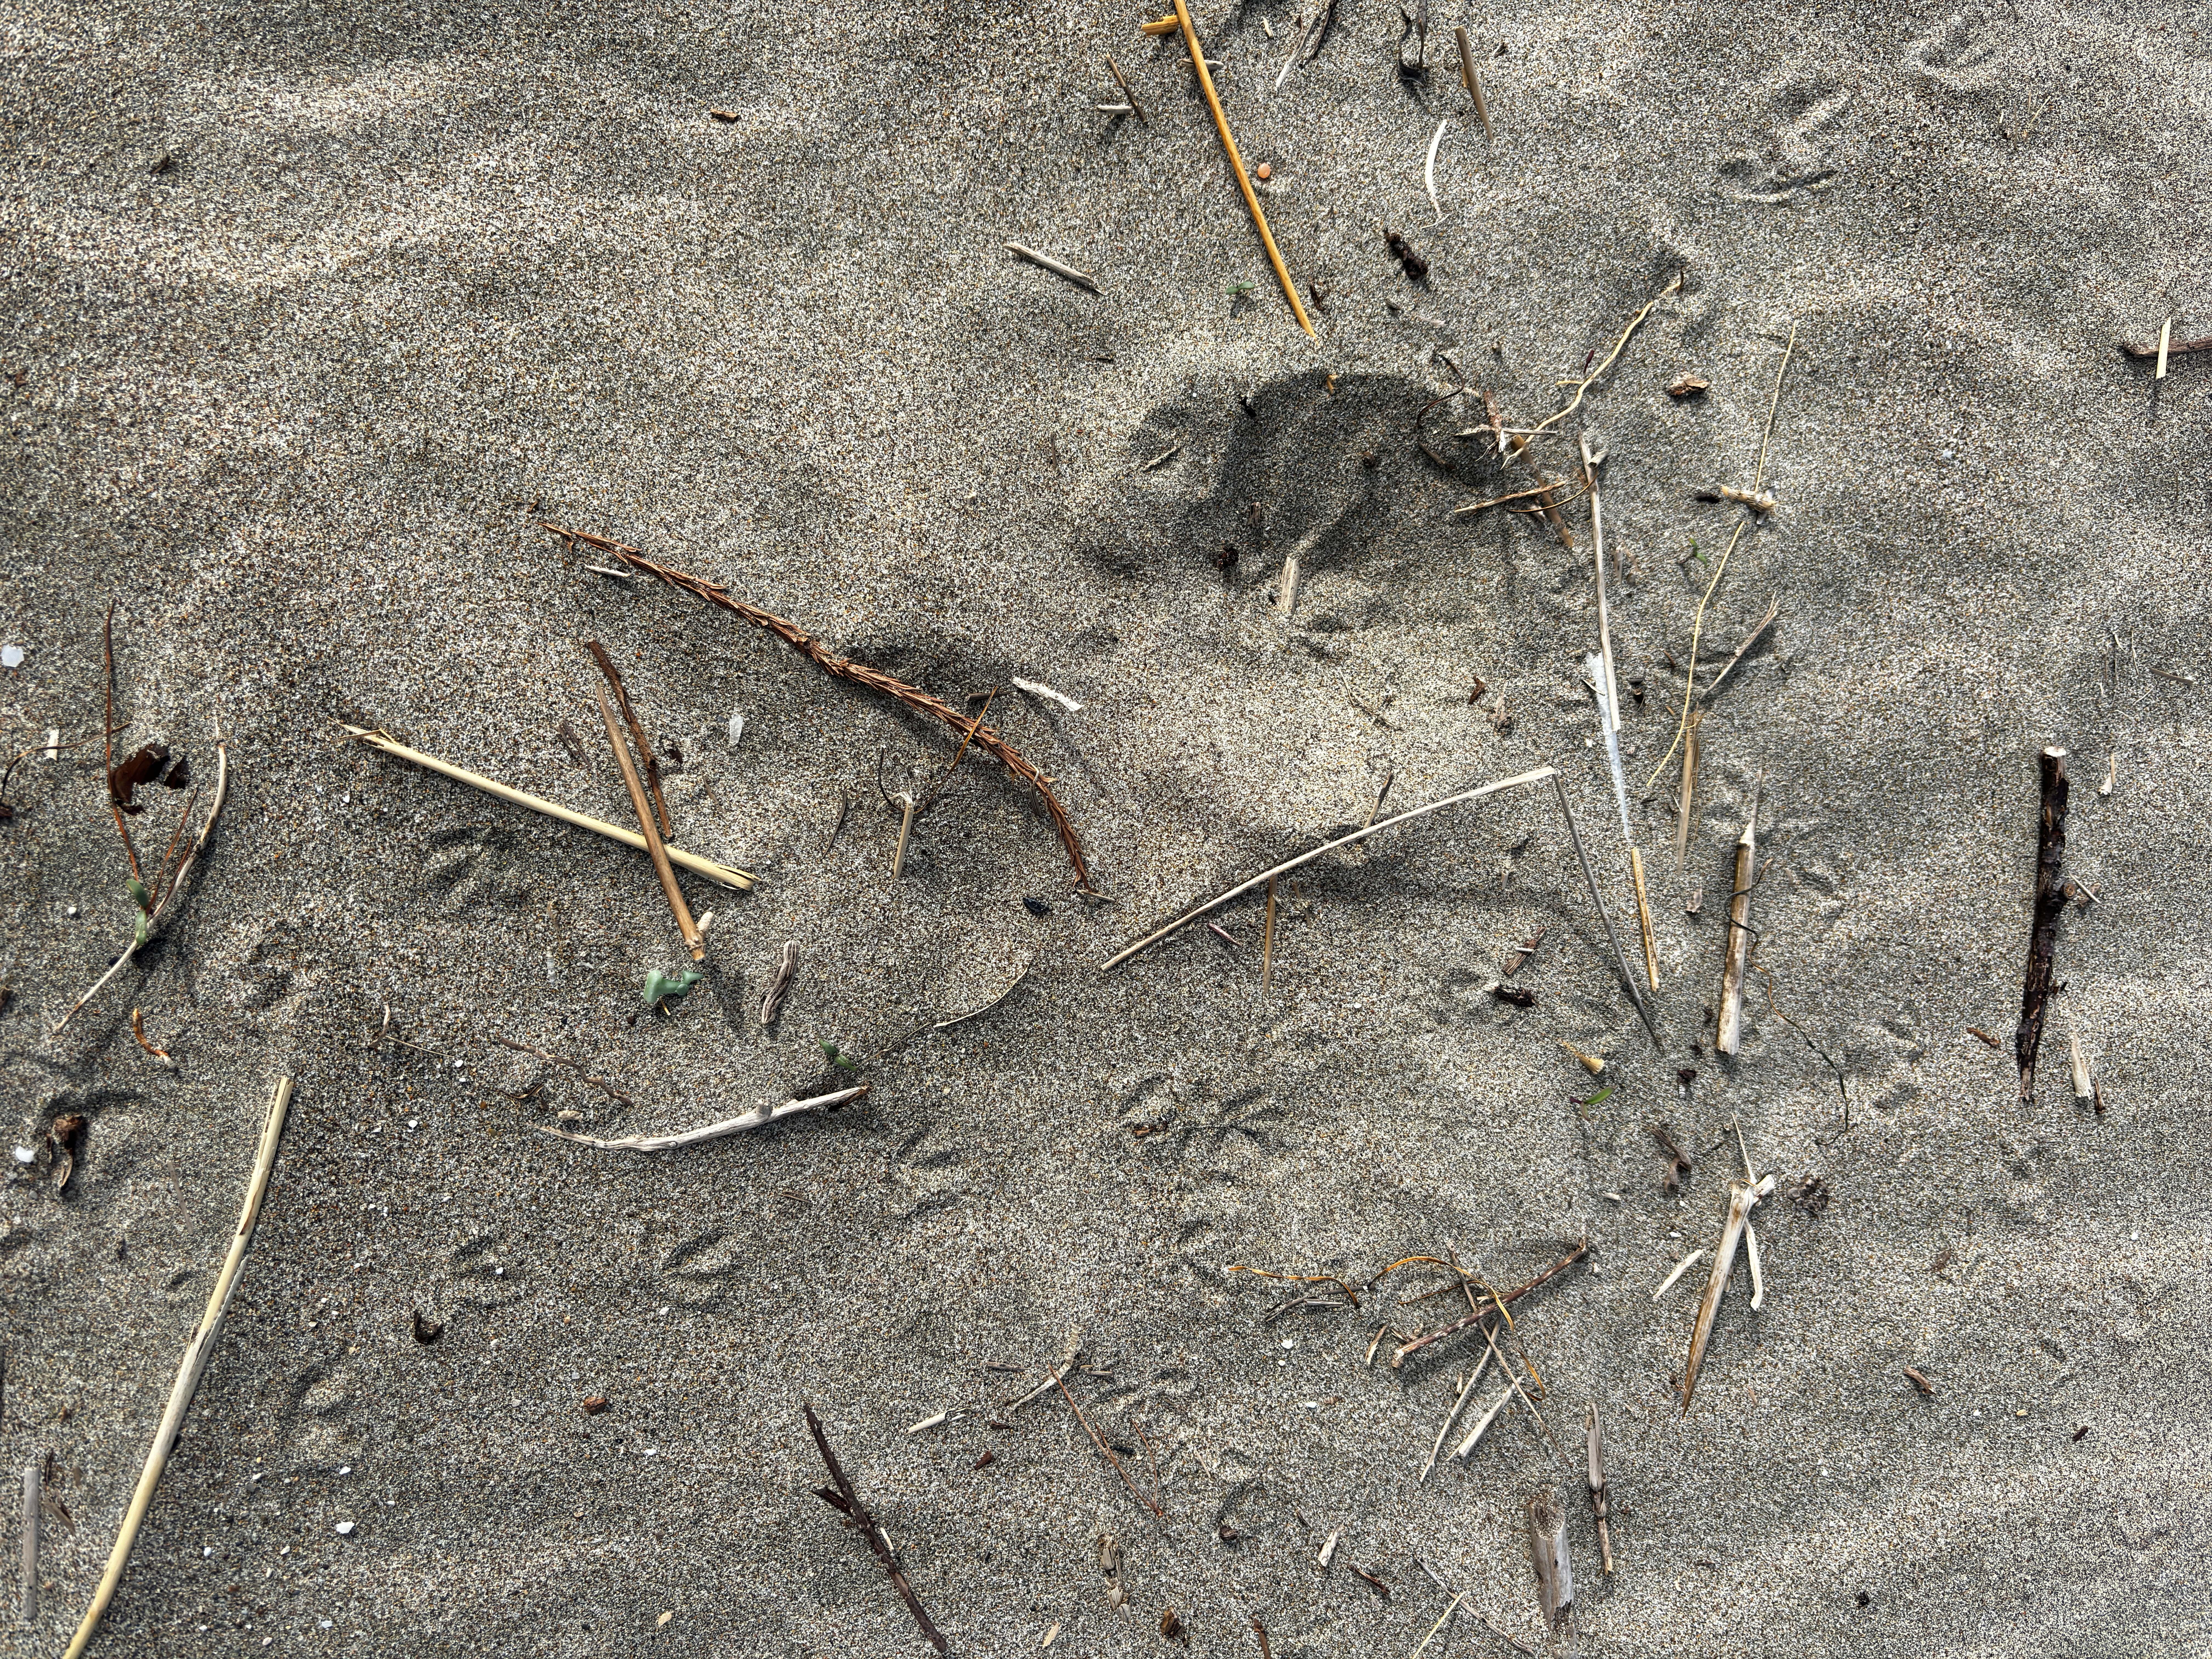 A photo of small bird footprints around a small depression in sand.